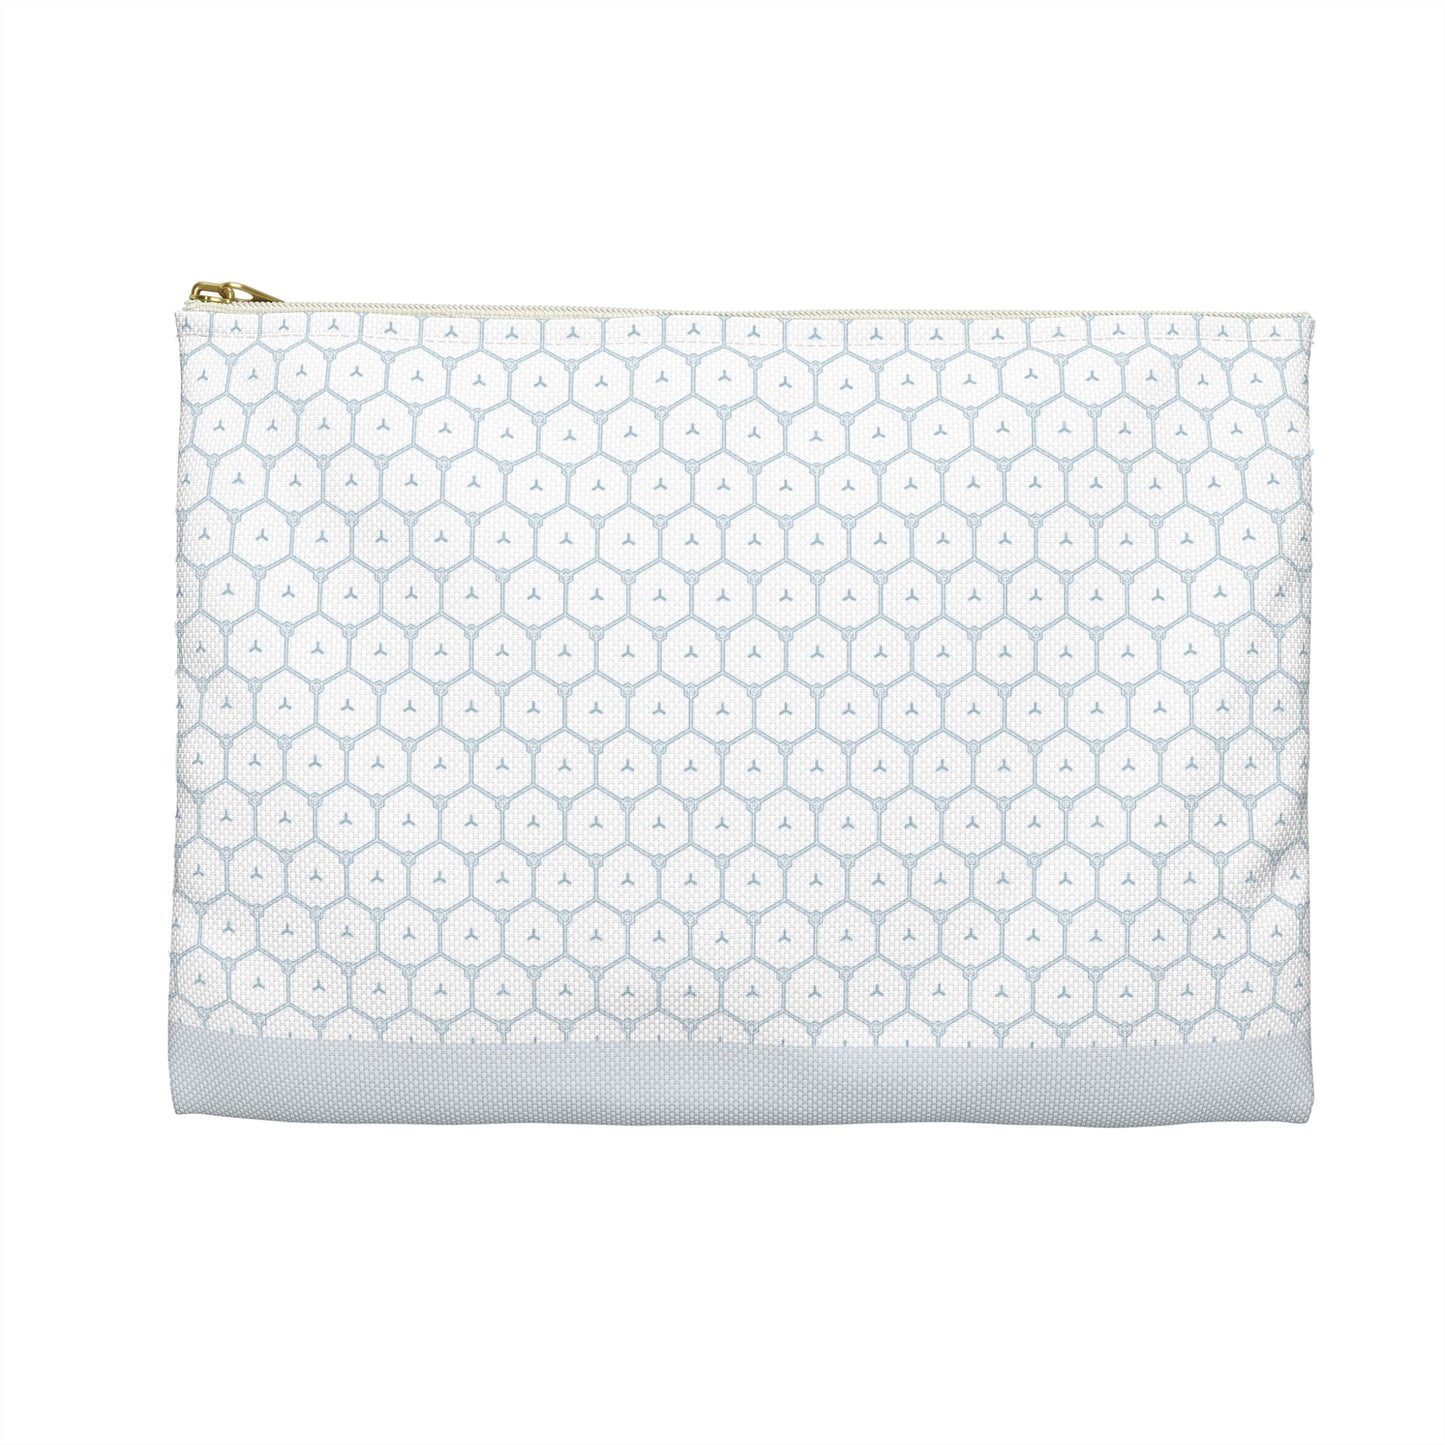 Sweet Grid Accessory Pouch